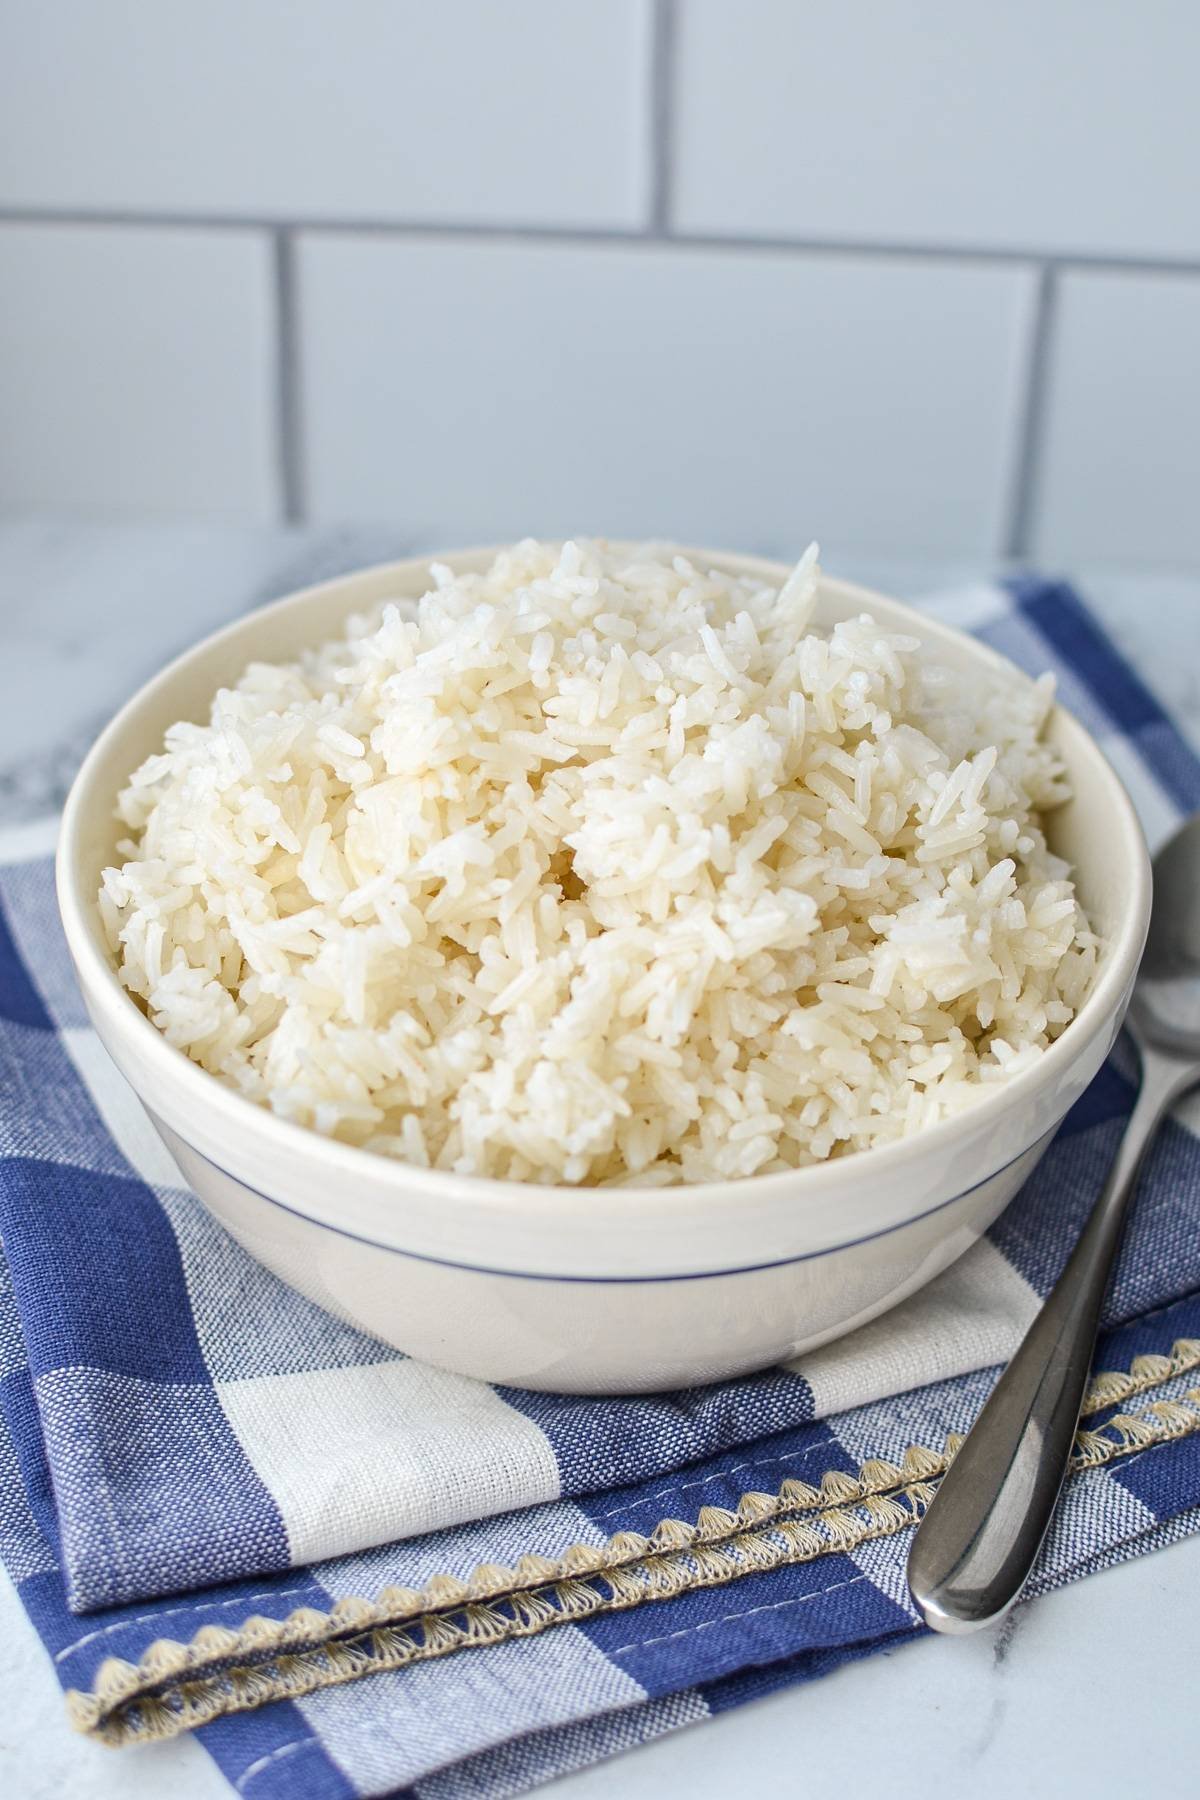 A bowl of white rice on a blue check napkin, with white tile in the background.